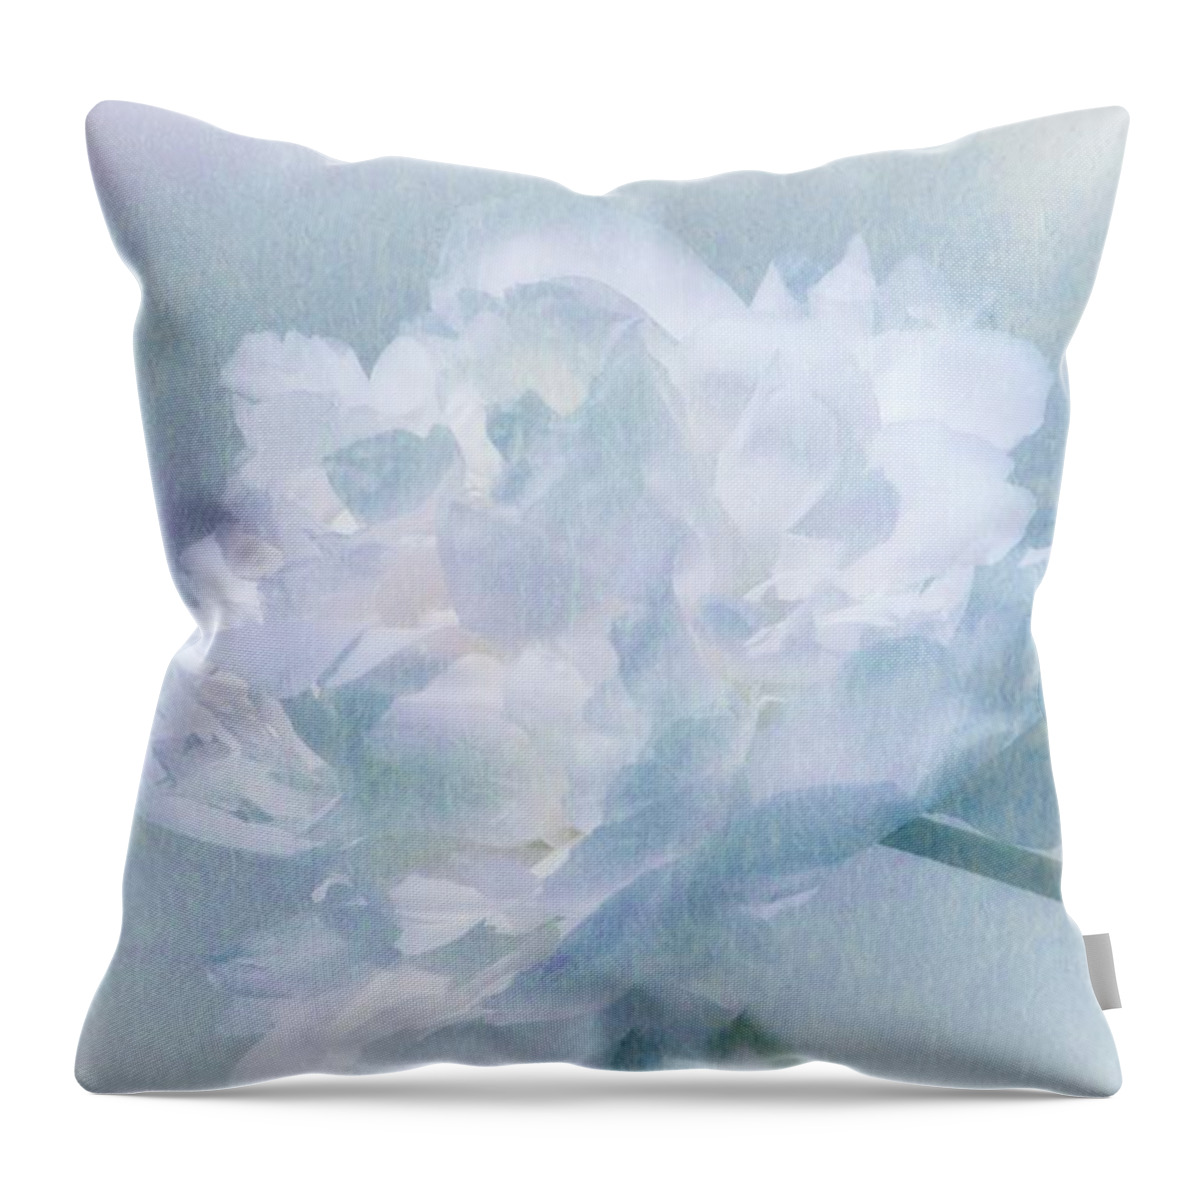 Textured Throw Pillow featuring the photograph Gracefully by Barbara S Nickerson